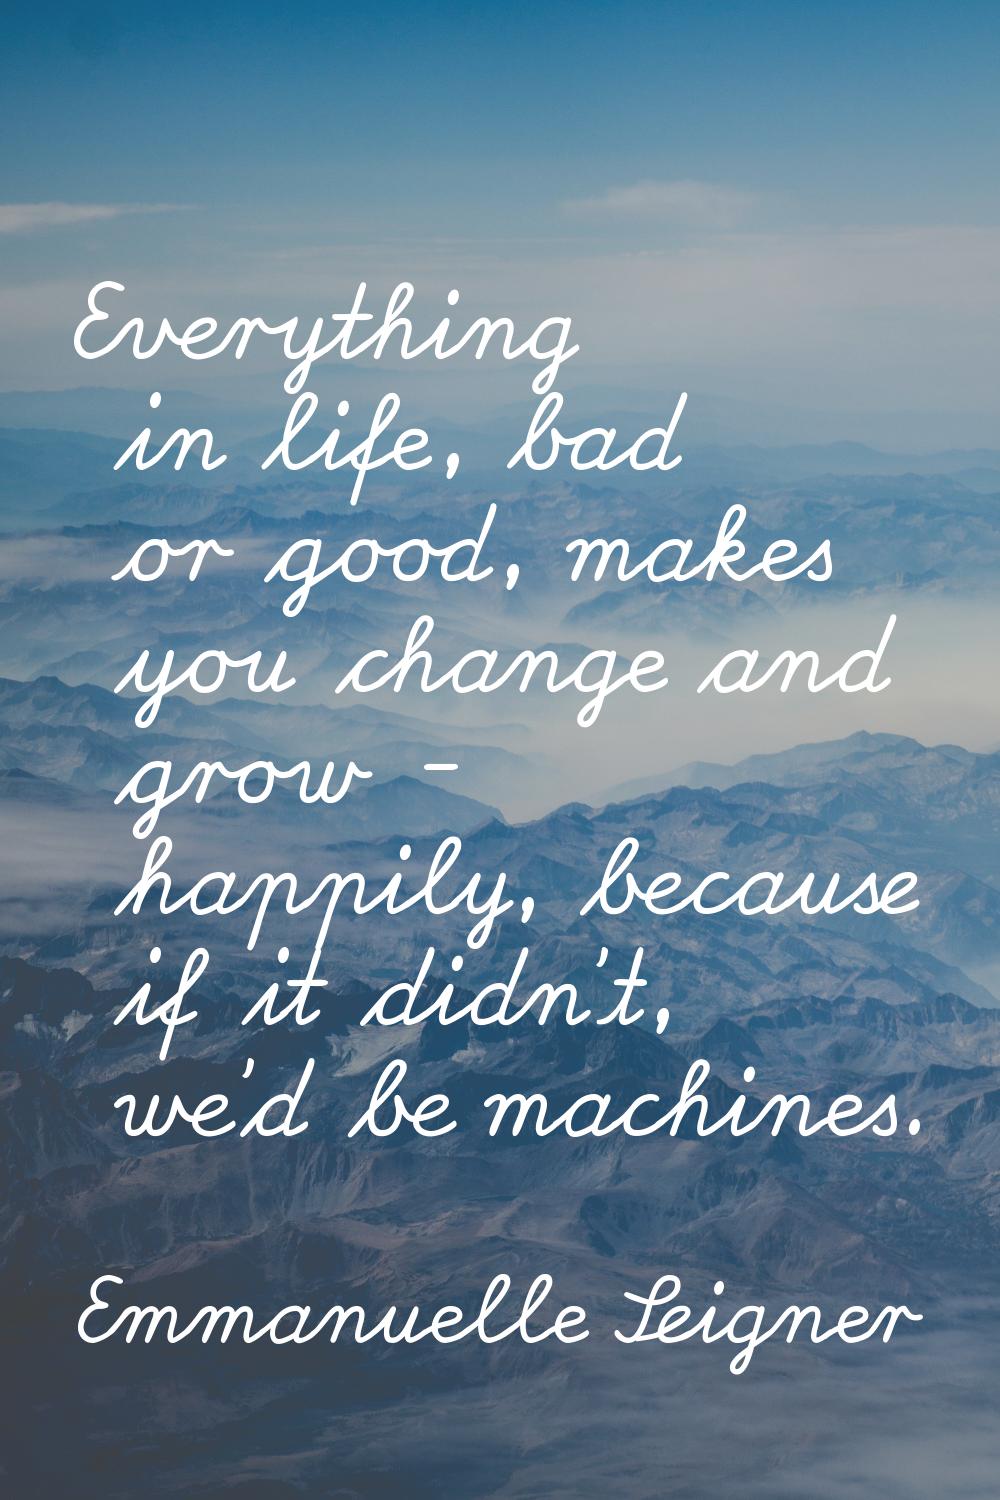 Everything in life, bad or good, makes you change and grow - happily, because if it didn't, we'd be